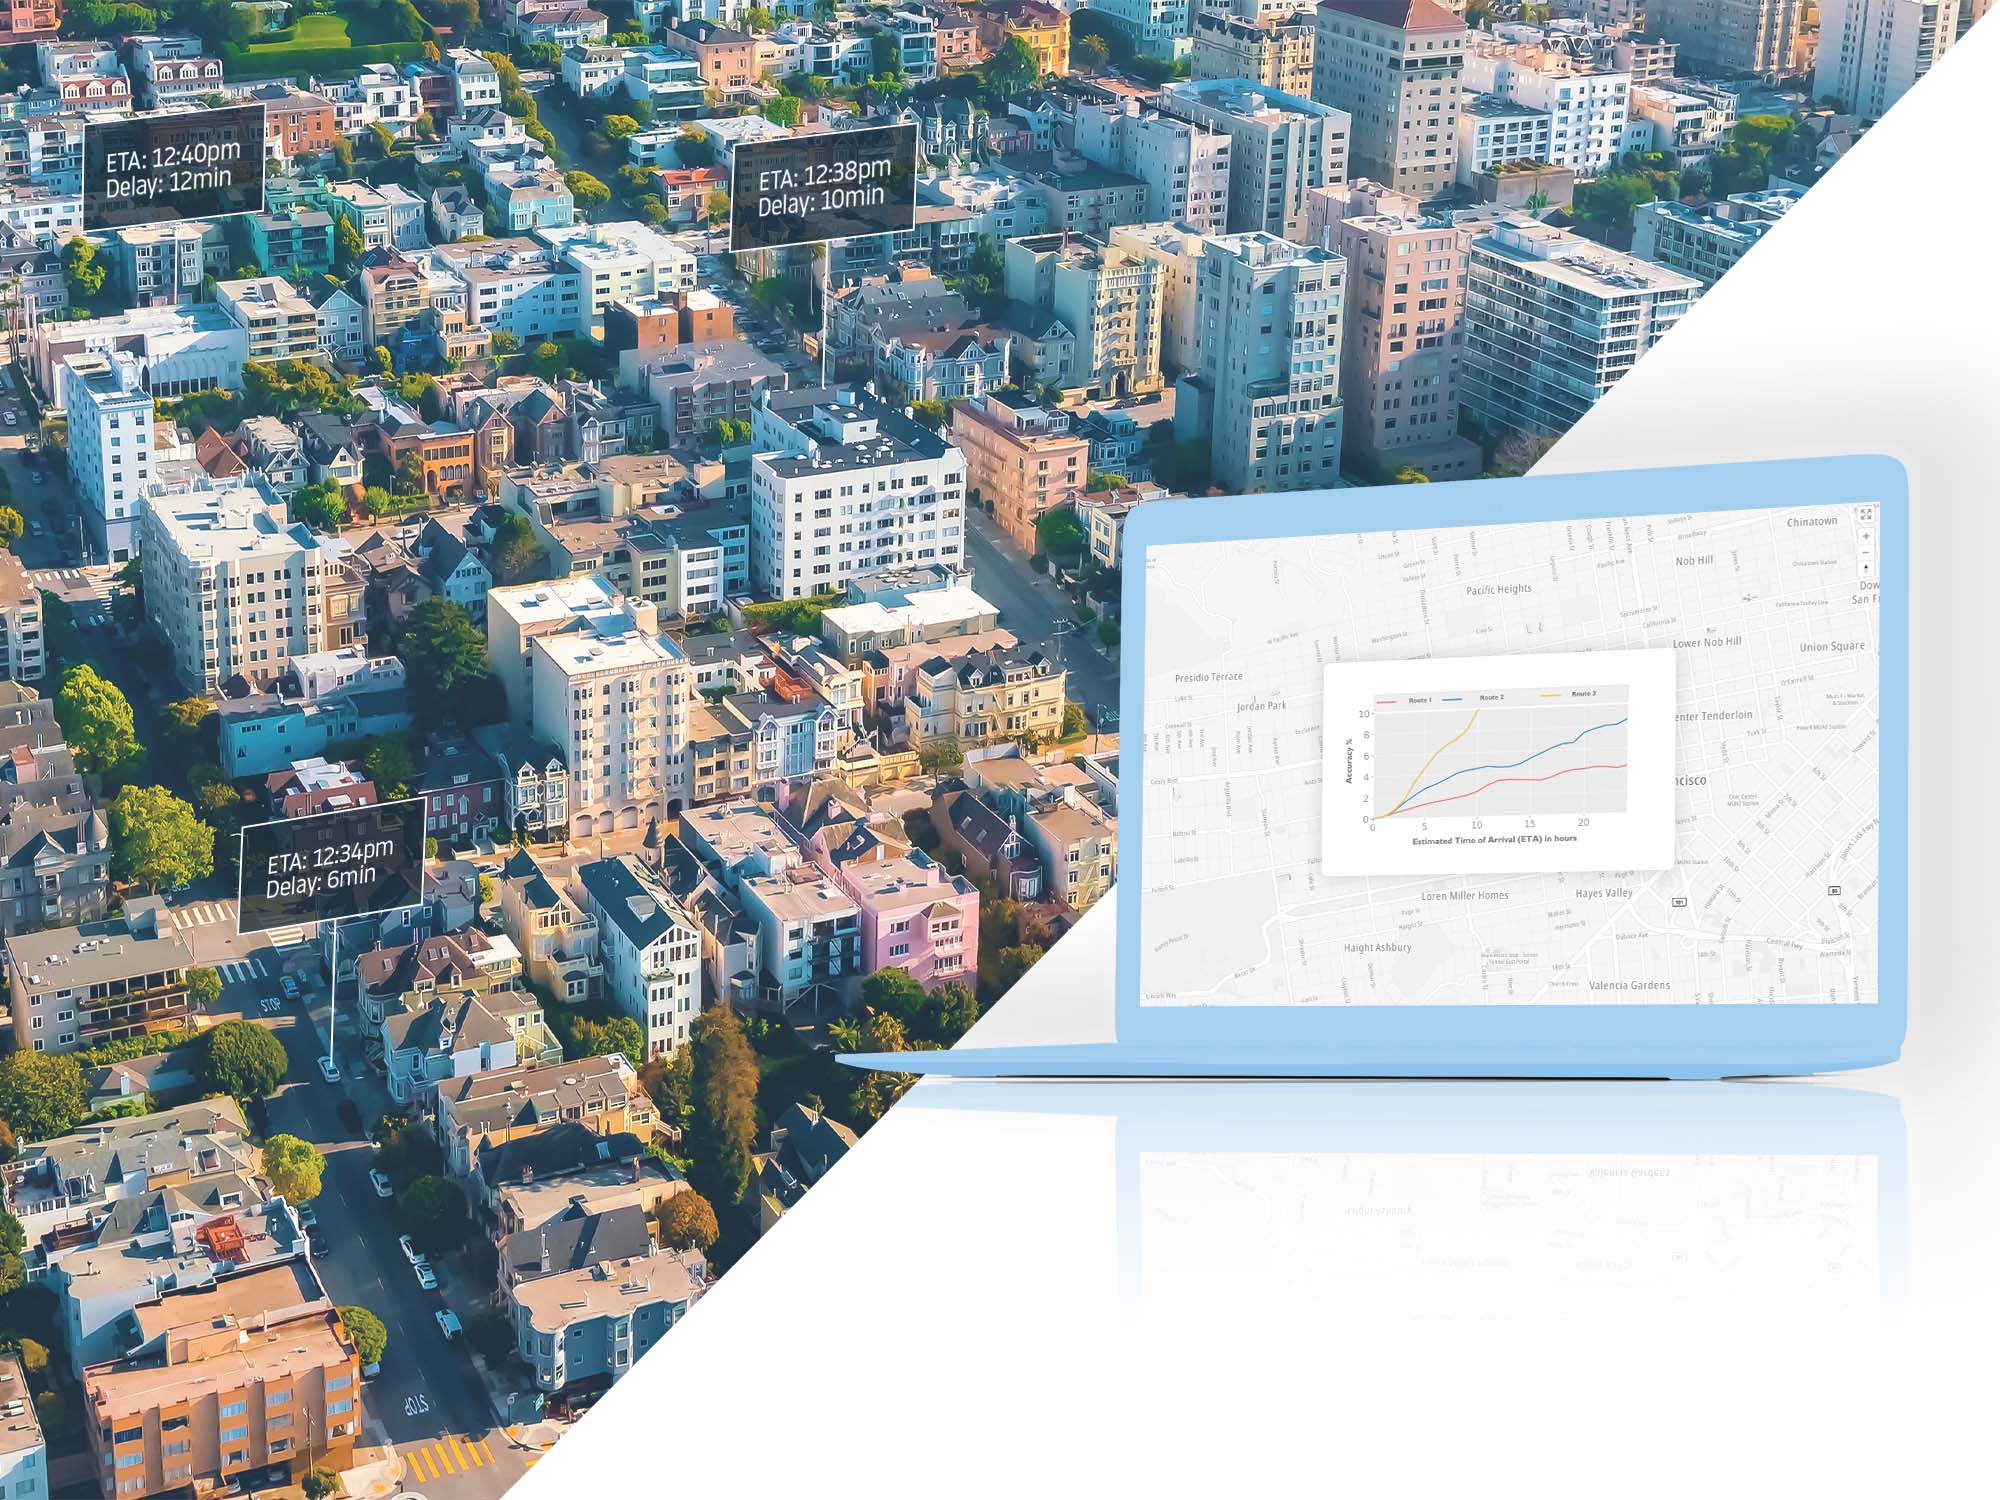 Laptop showing map alongside photo of a downtown urban city